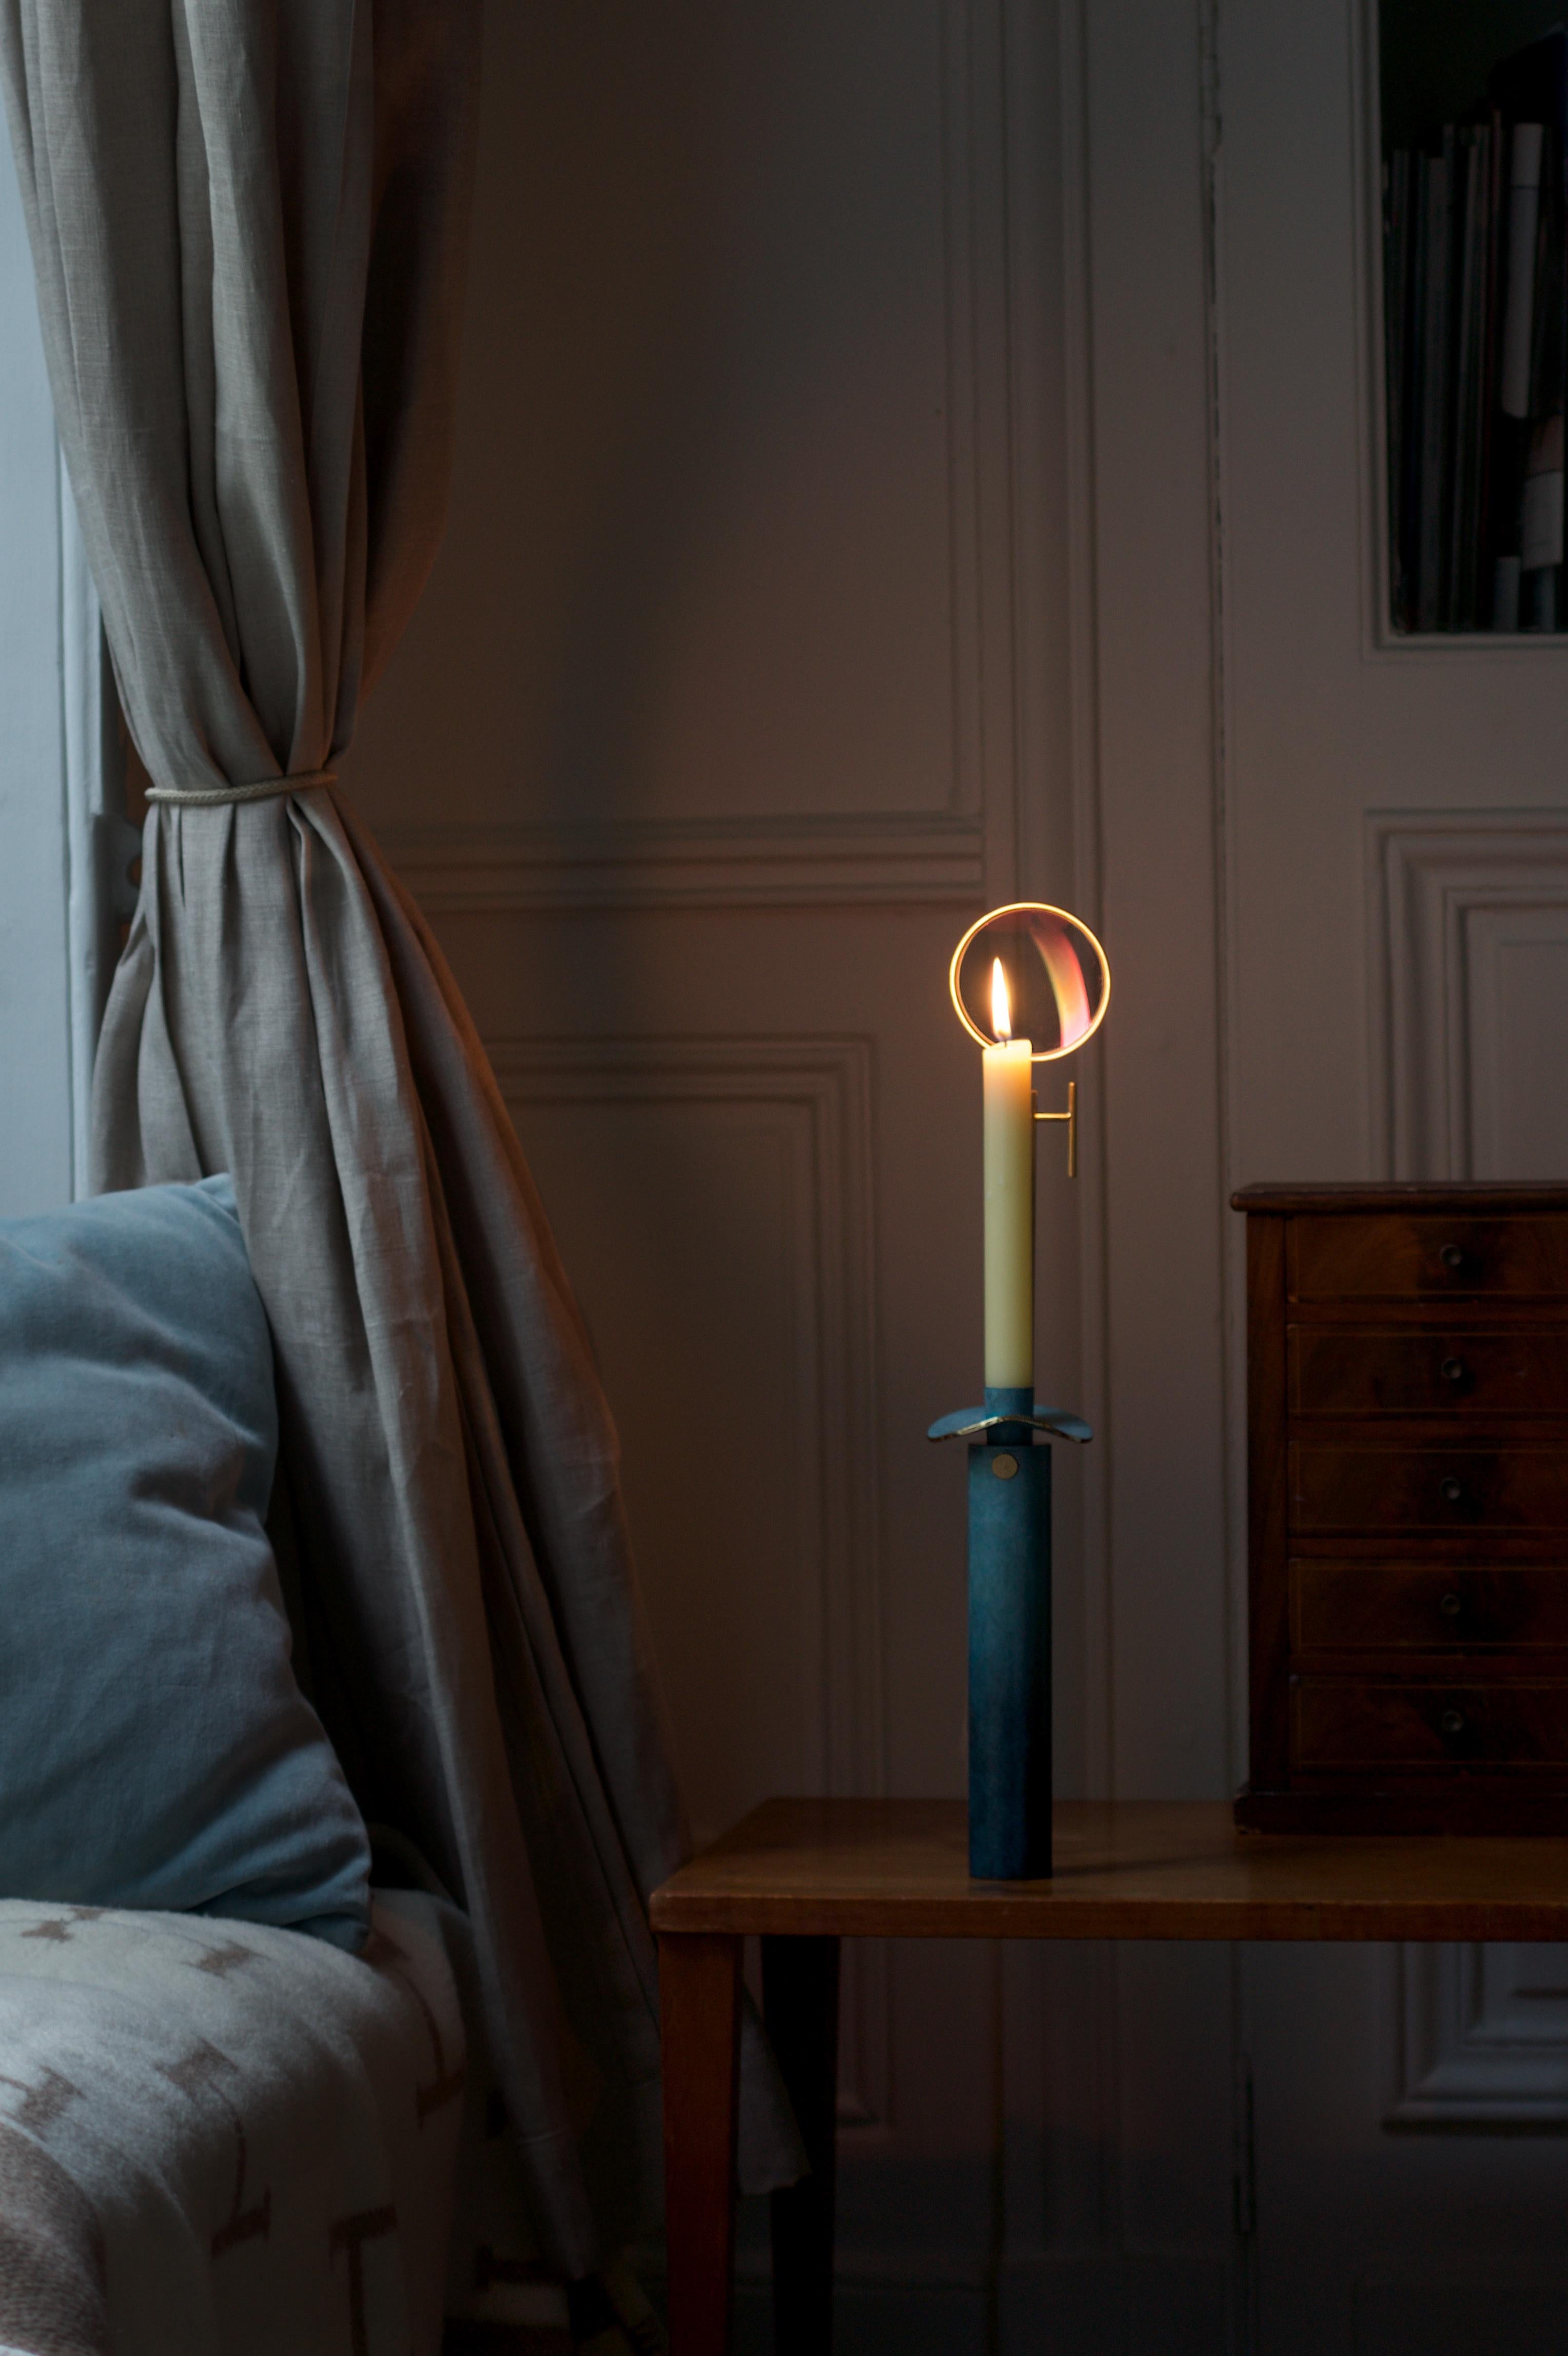 The Ernest candlestick, made by Marion Mezenge,  is part of the Astérie series created between 2019 and 2020.It is made of oiled brass and glass, the foot and the bobeche are patinated blue.

dimensions: 18.5